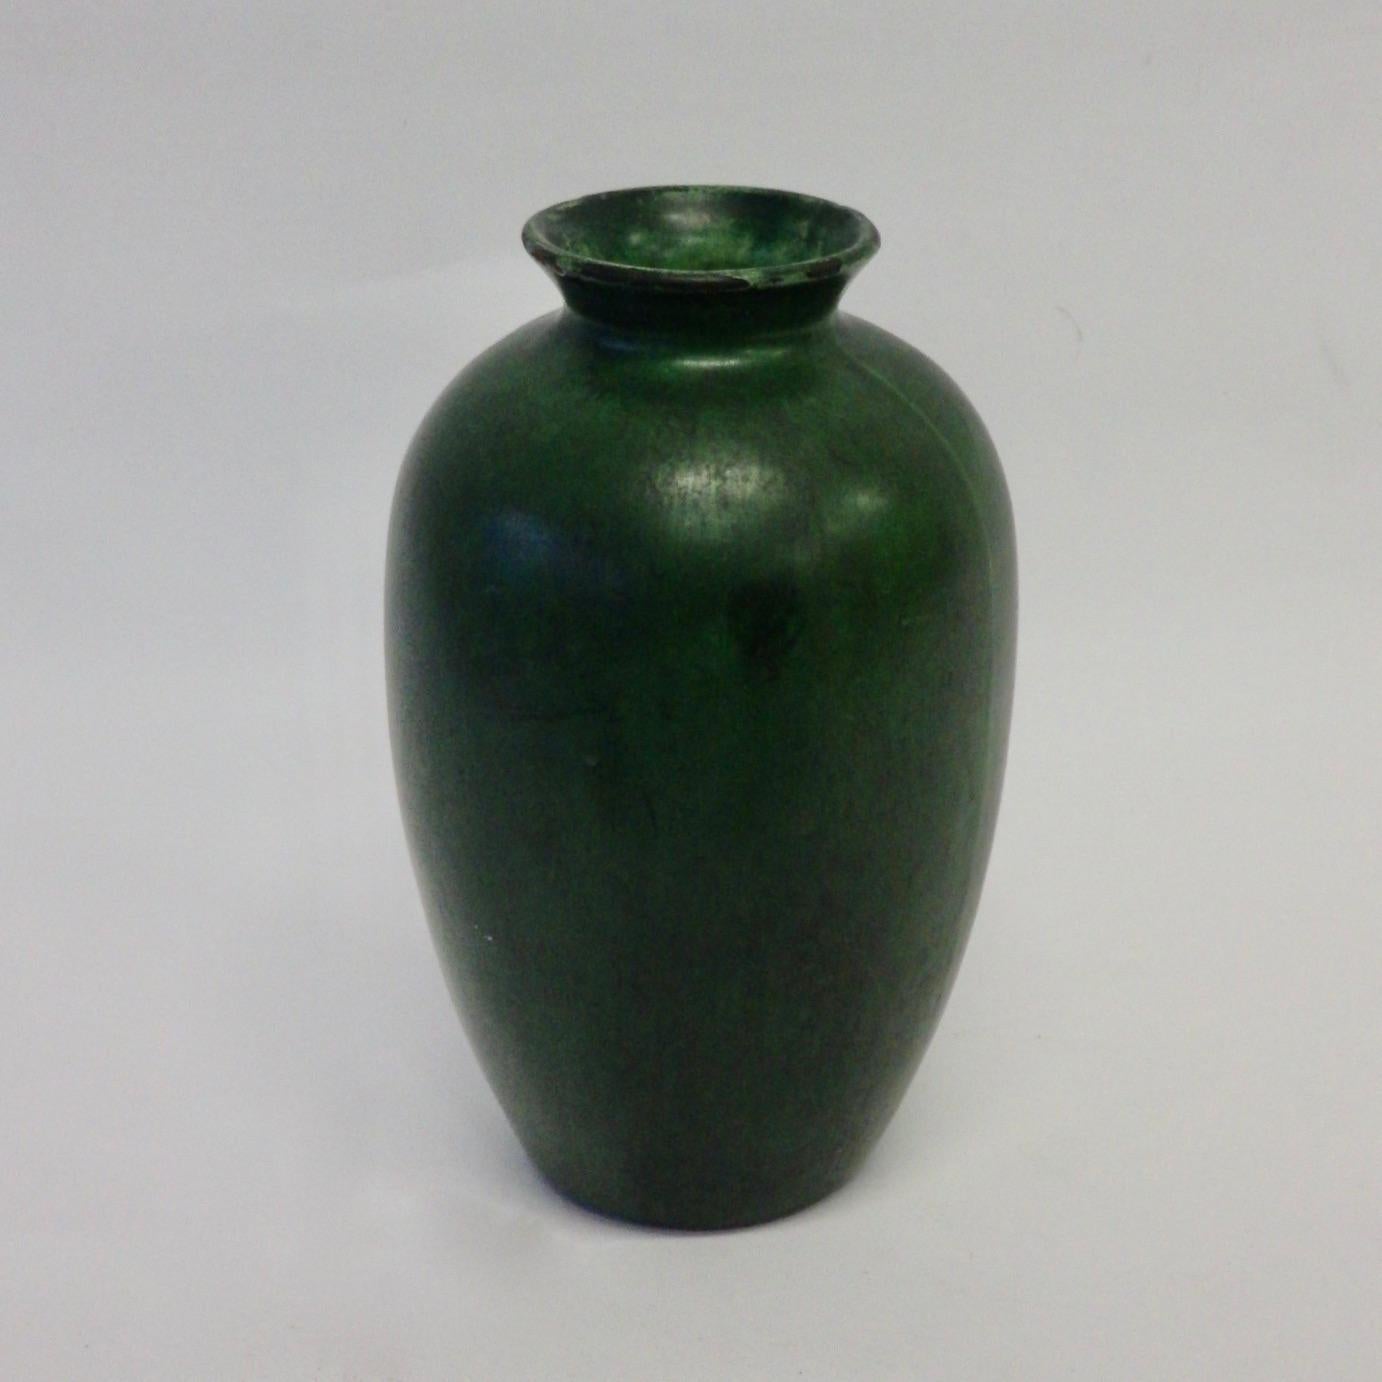 Classic color and form Arts & Crafts green pottery vase.